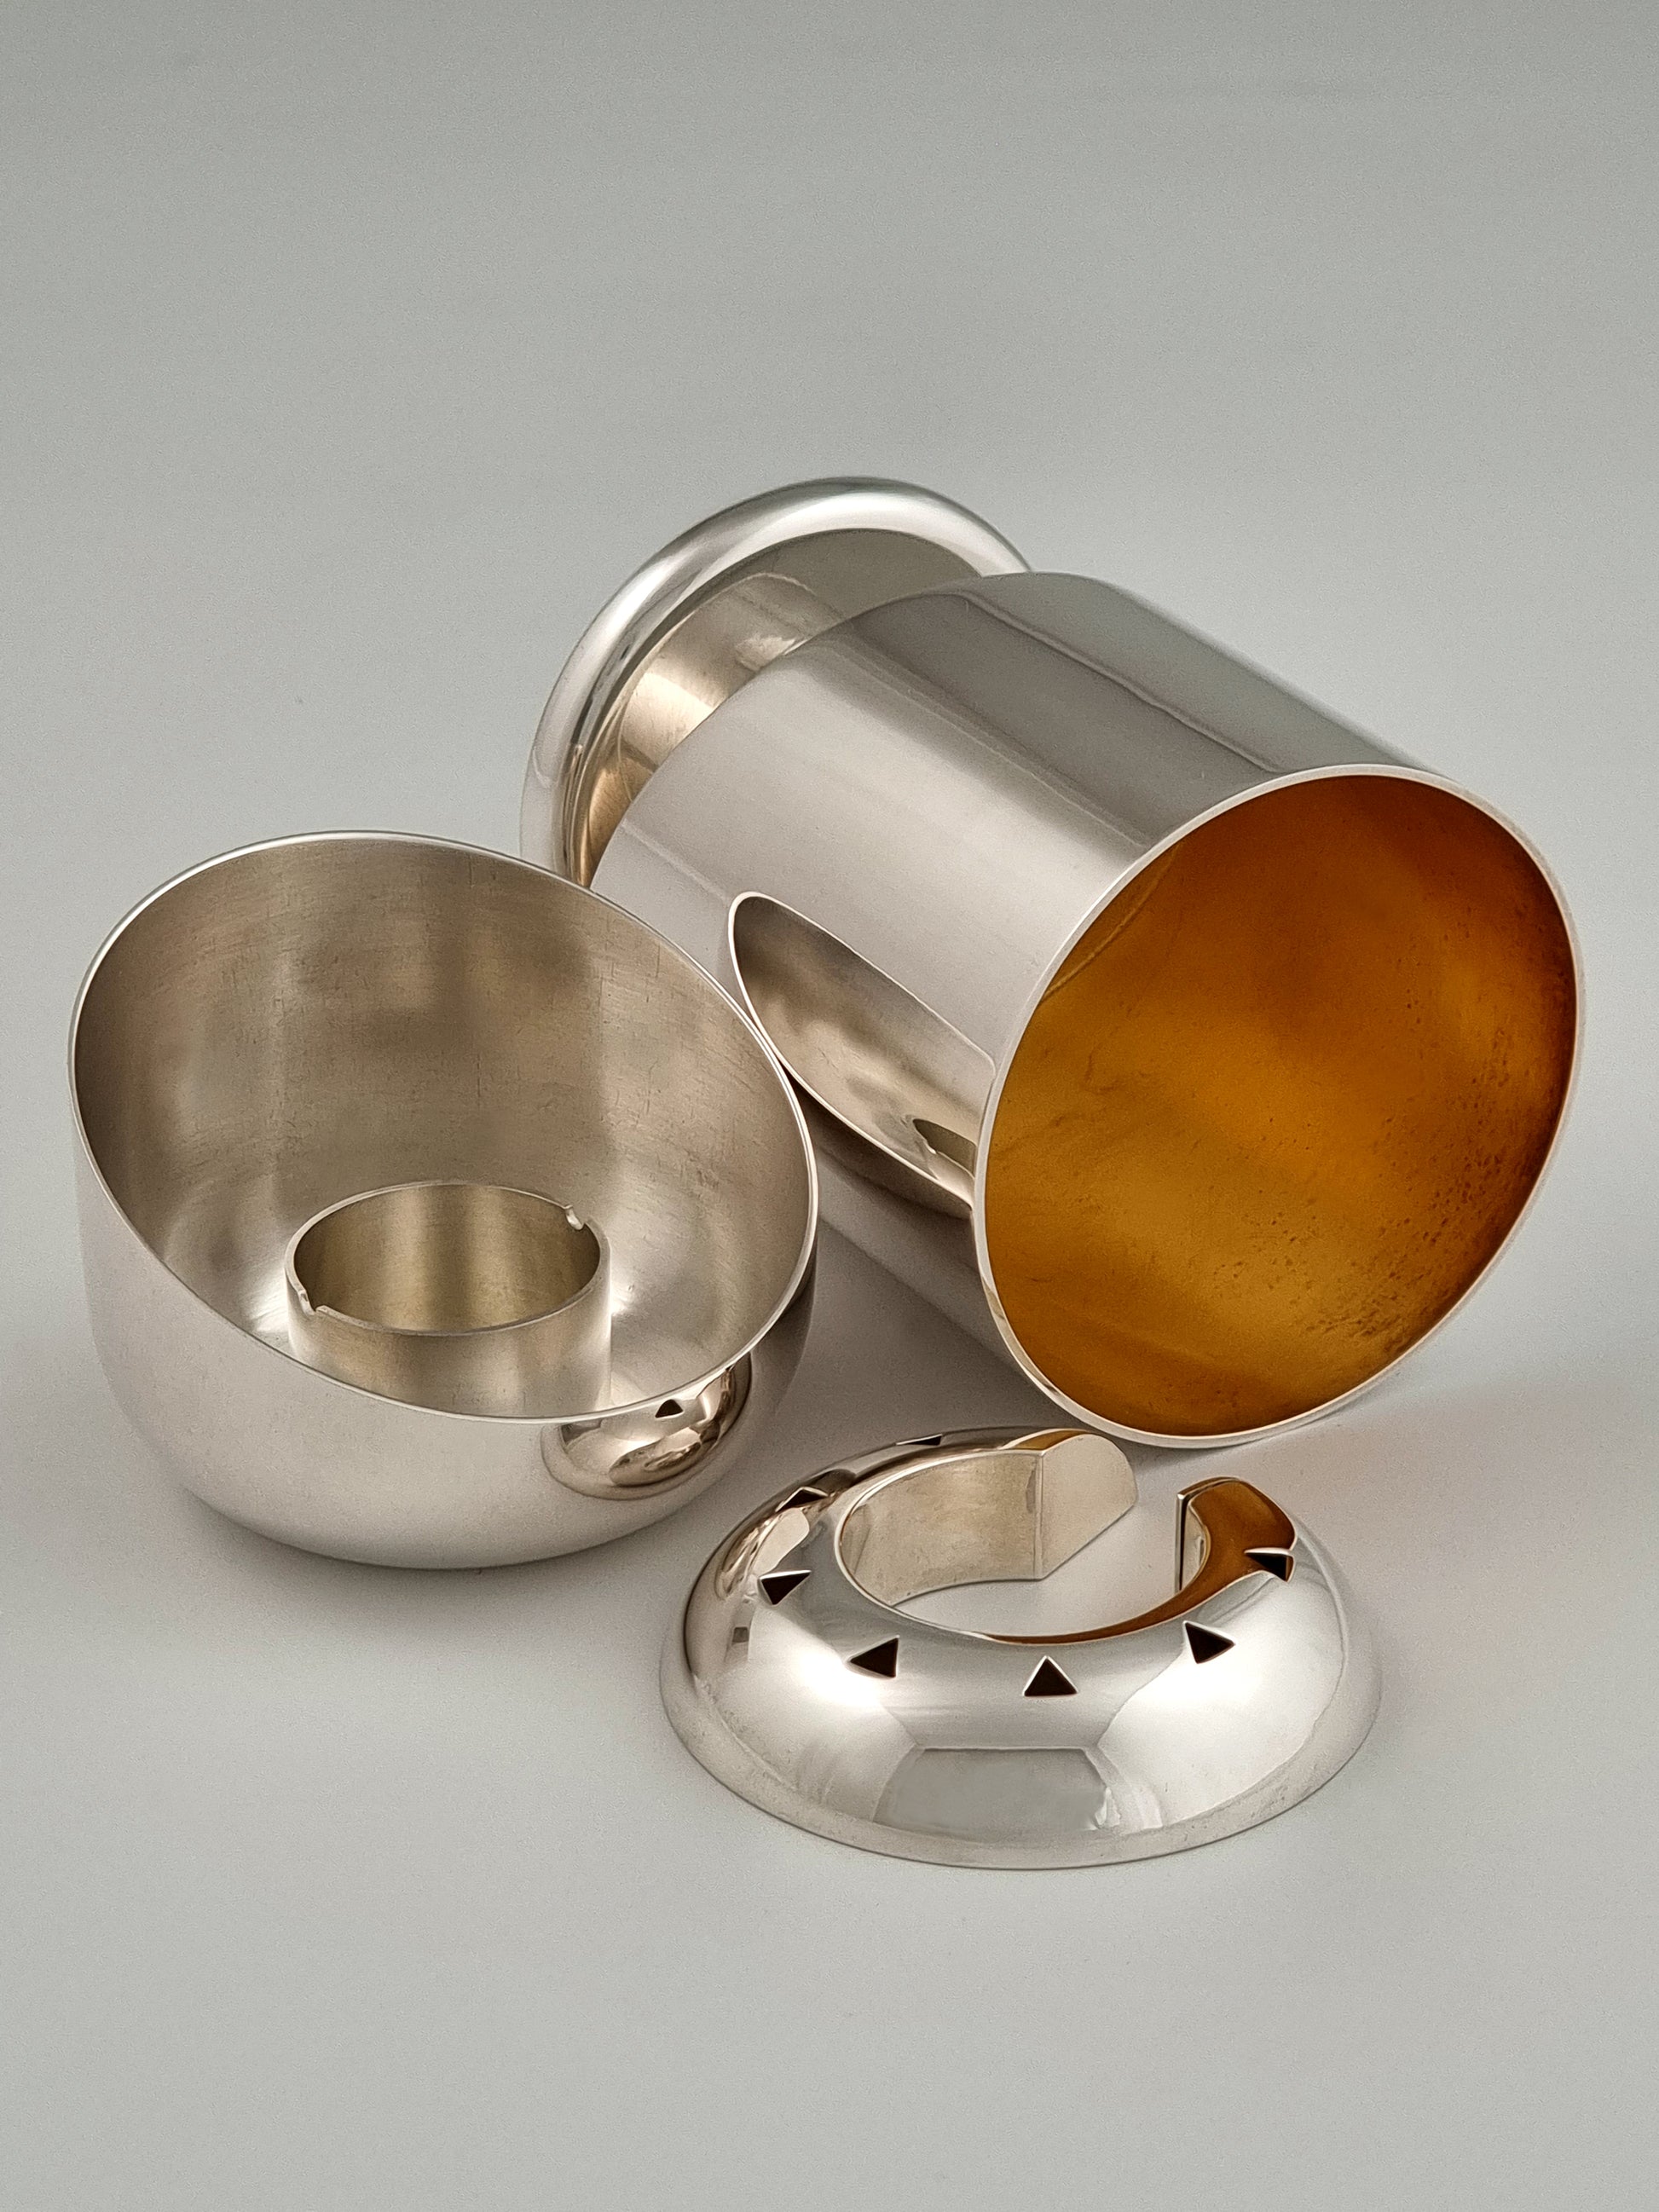 Hannah Havdalah Set. This set was designed in 1989 and made of sterling silver and gold-plated silver, measuring 4½” by 3”.